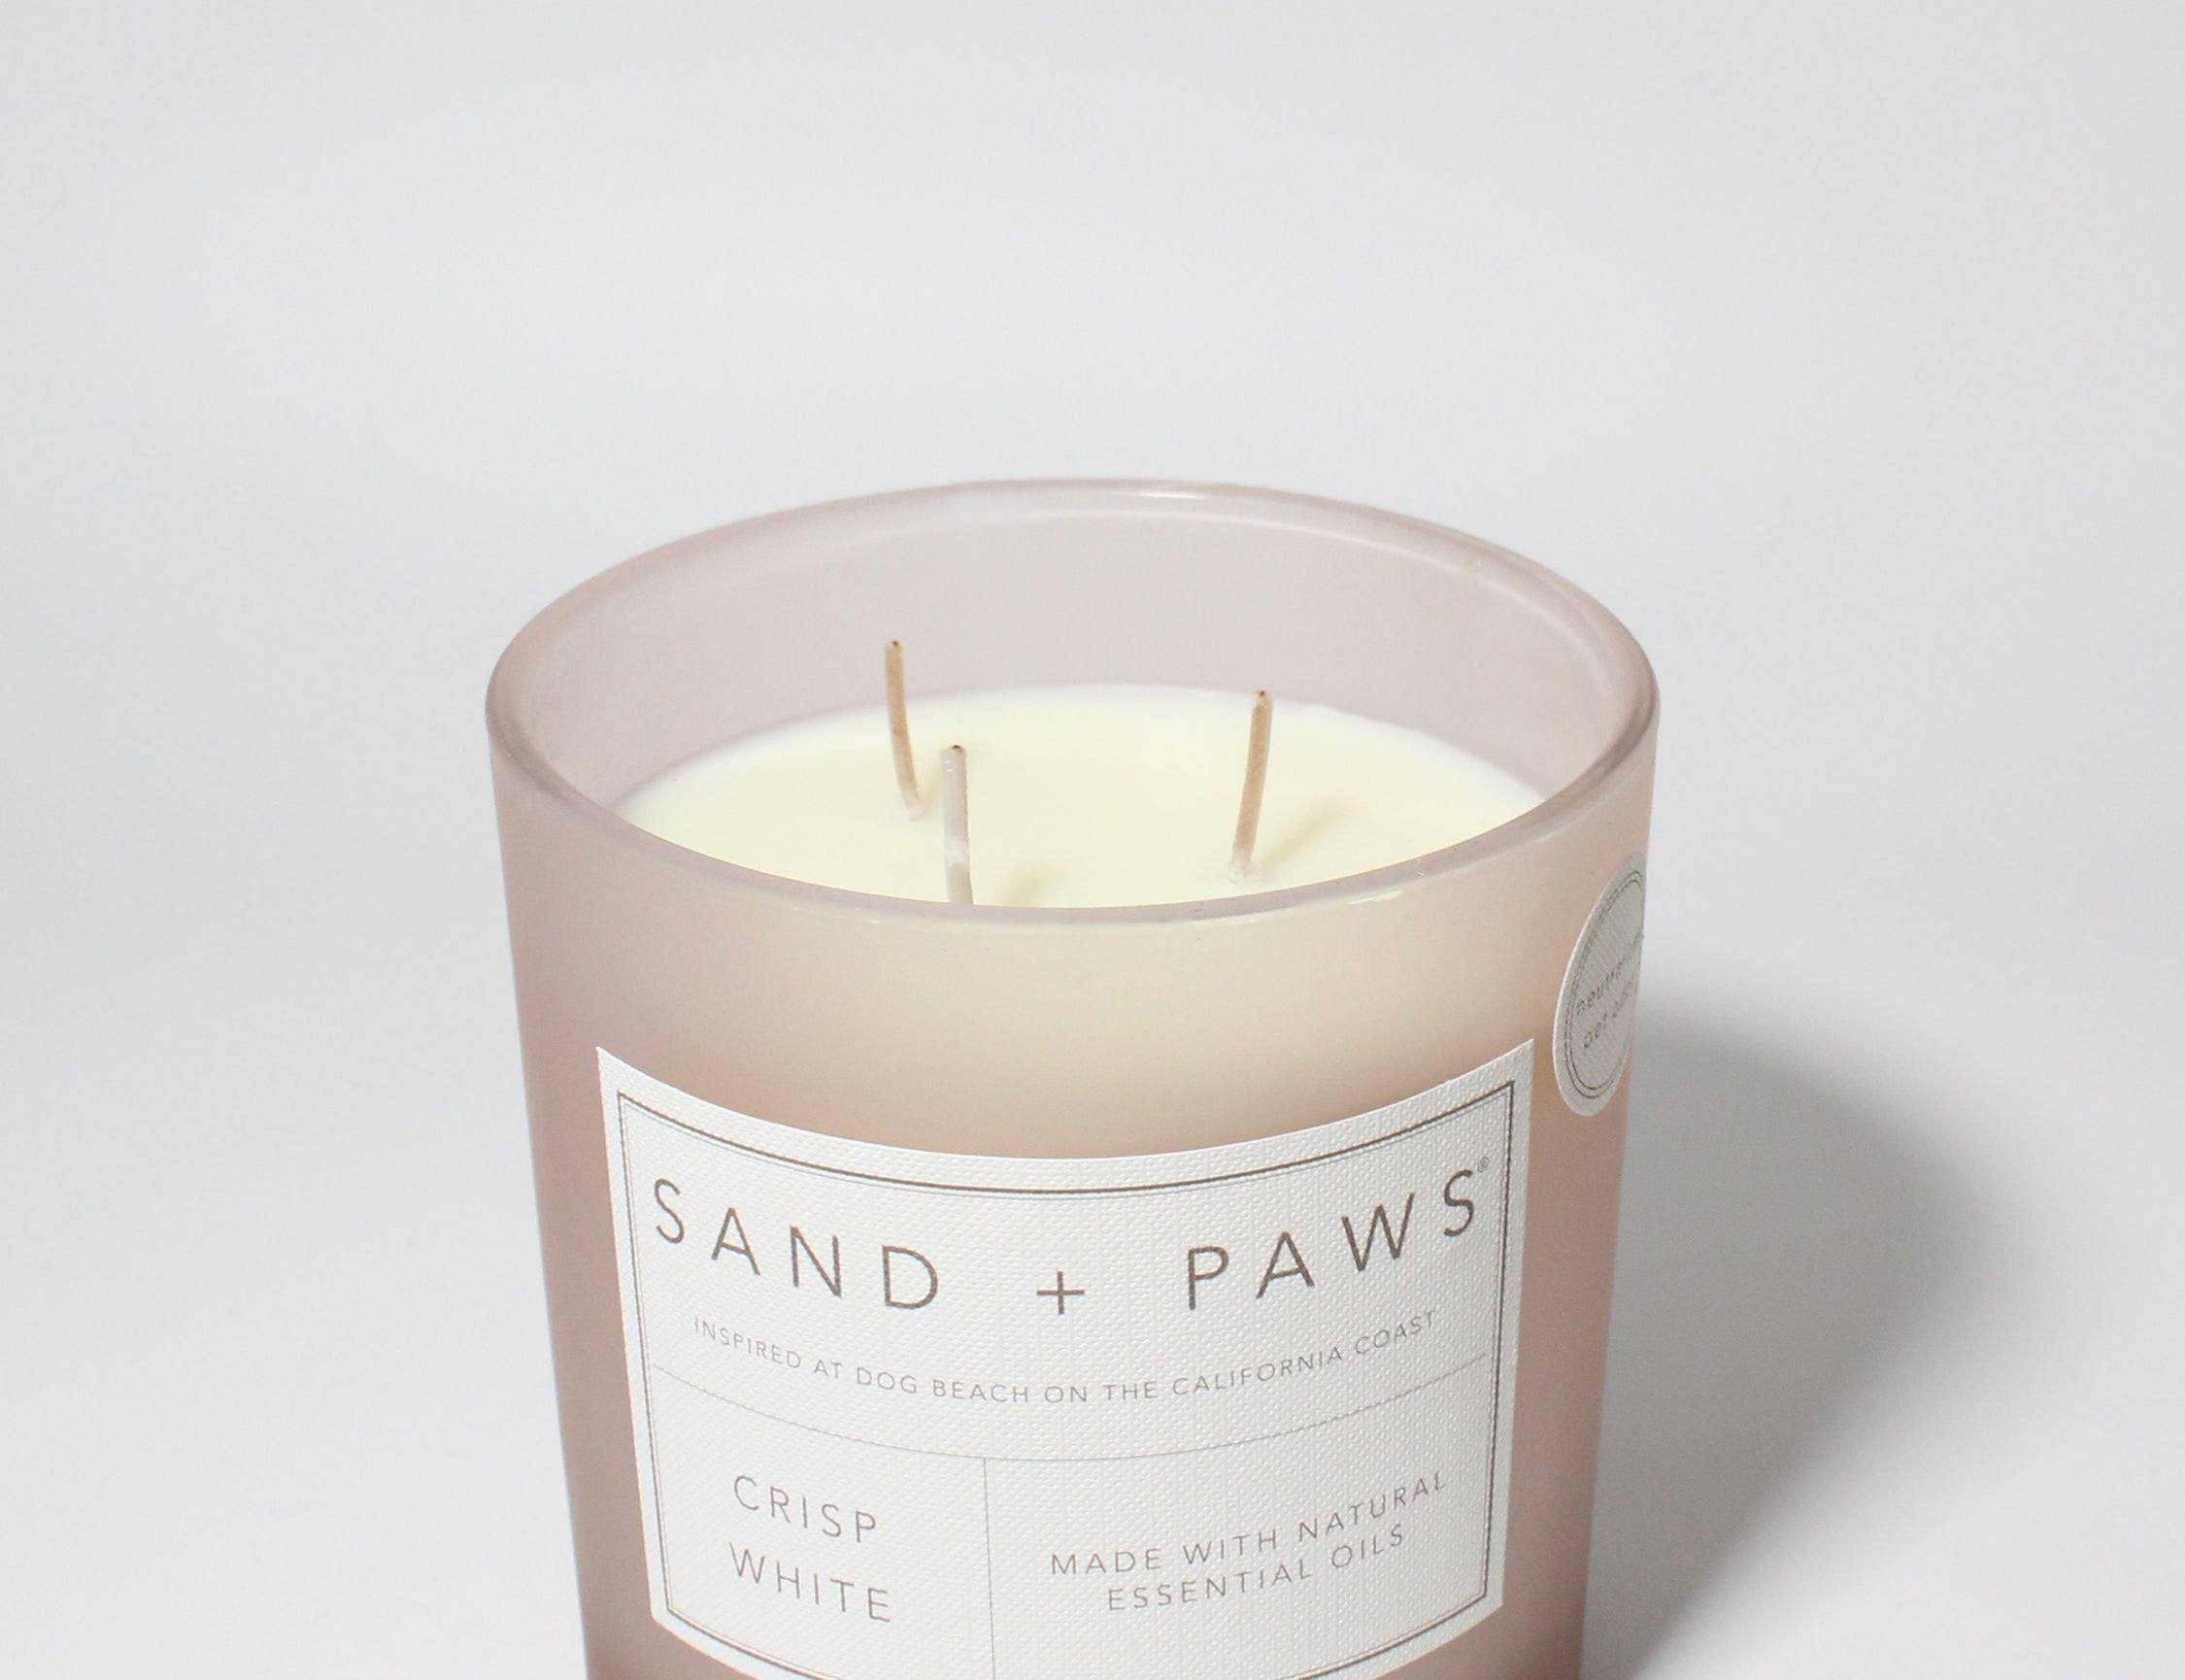 Sand + Paws Crisp White 21 oz scented candle Blush vessel with You're Pawsome wood lid